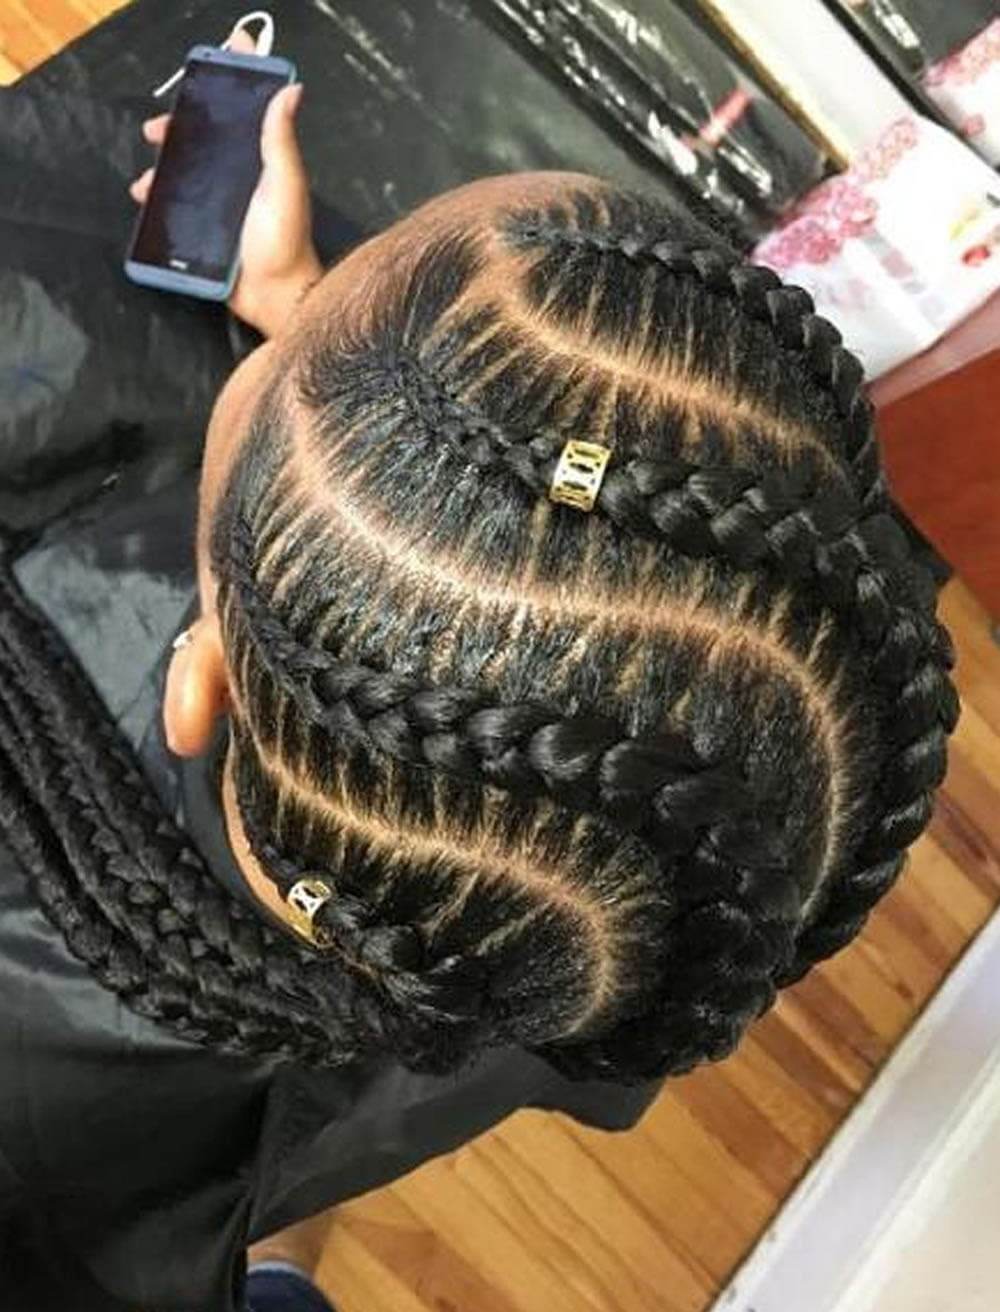 20 Best African American Braided Hairstyles for Women 2017 ...